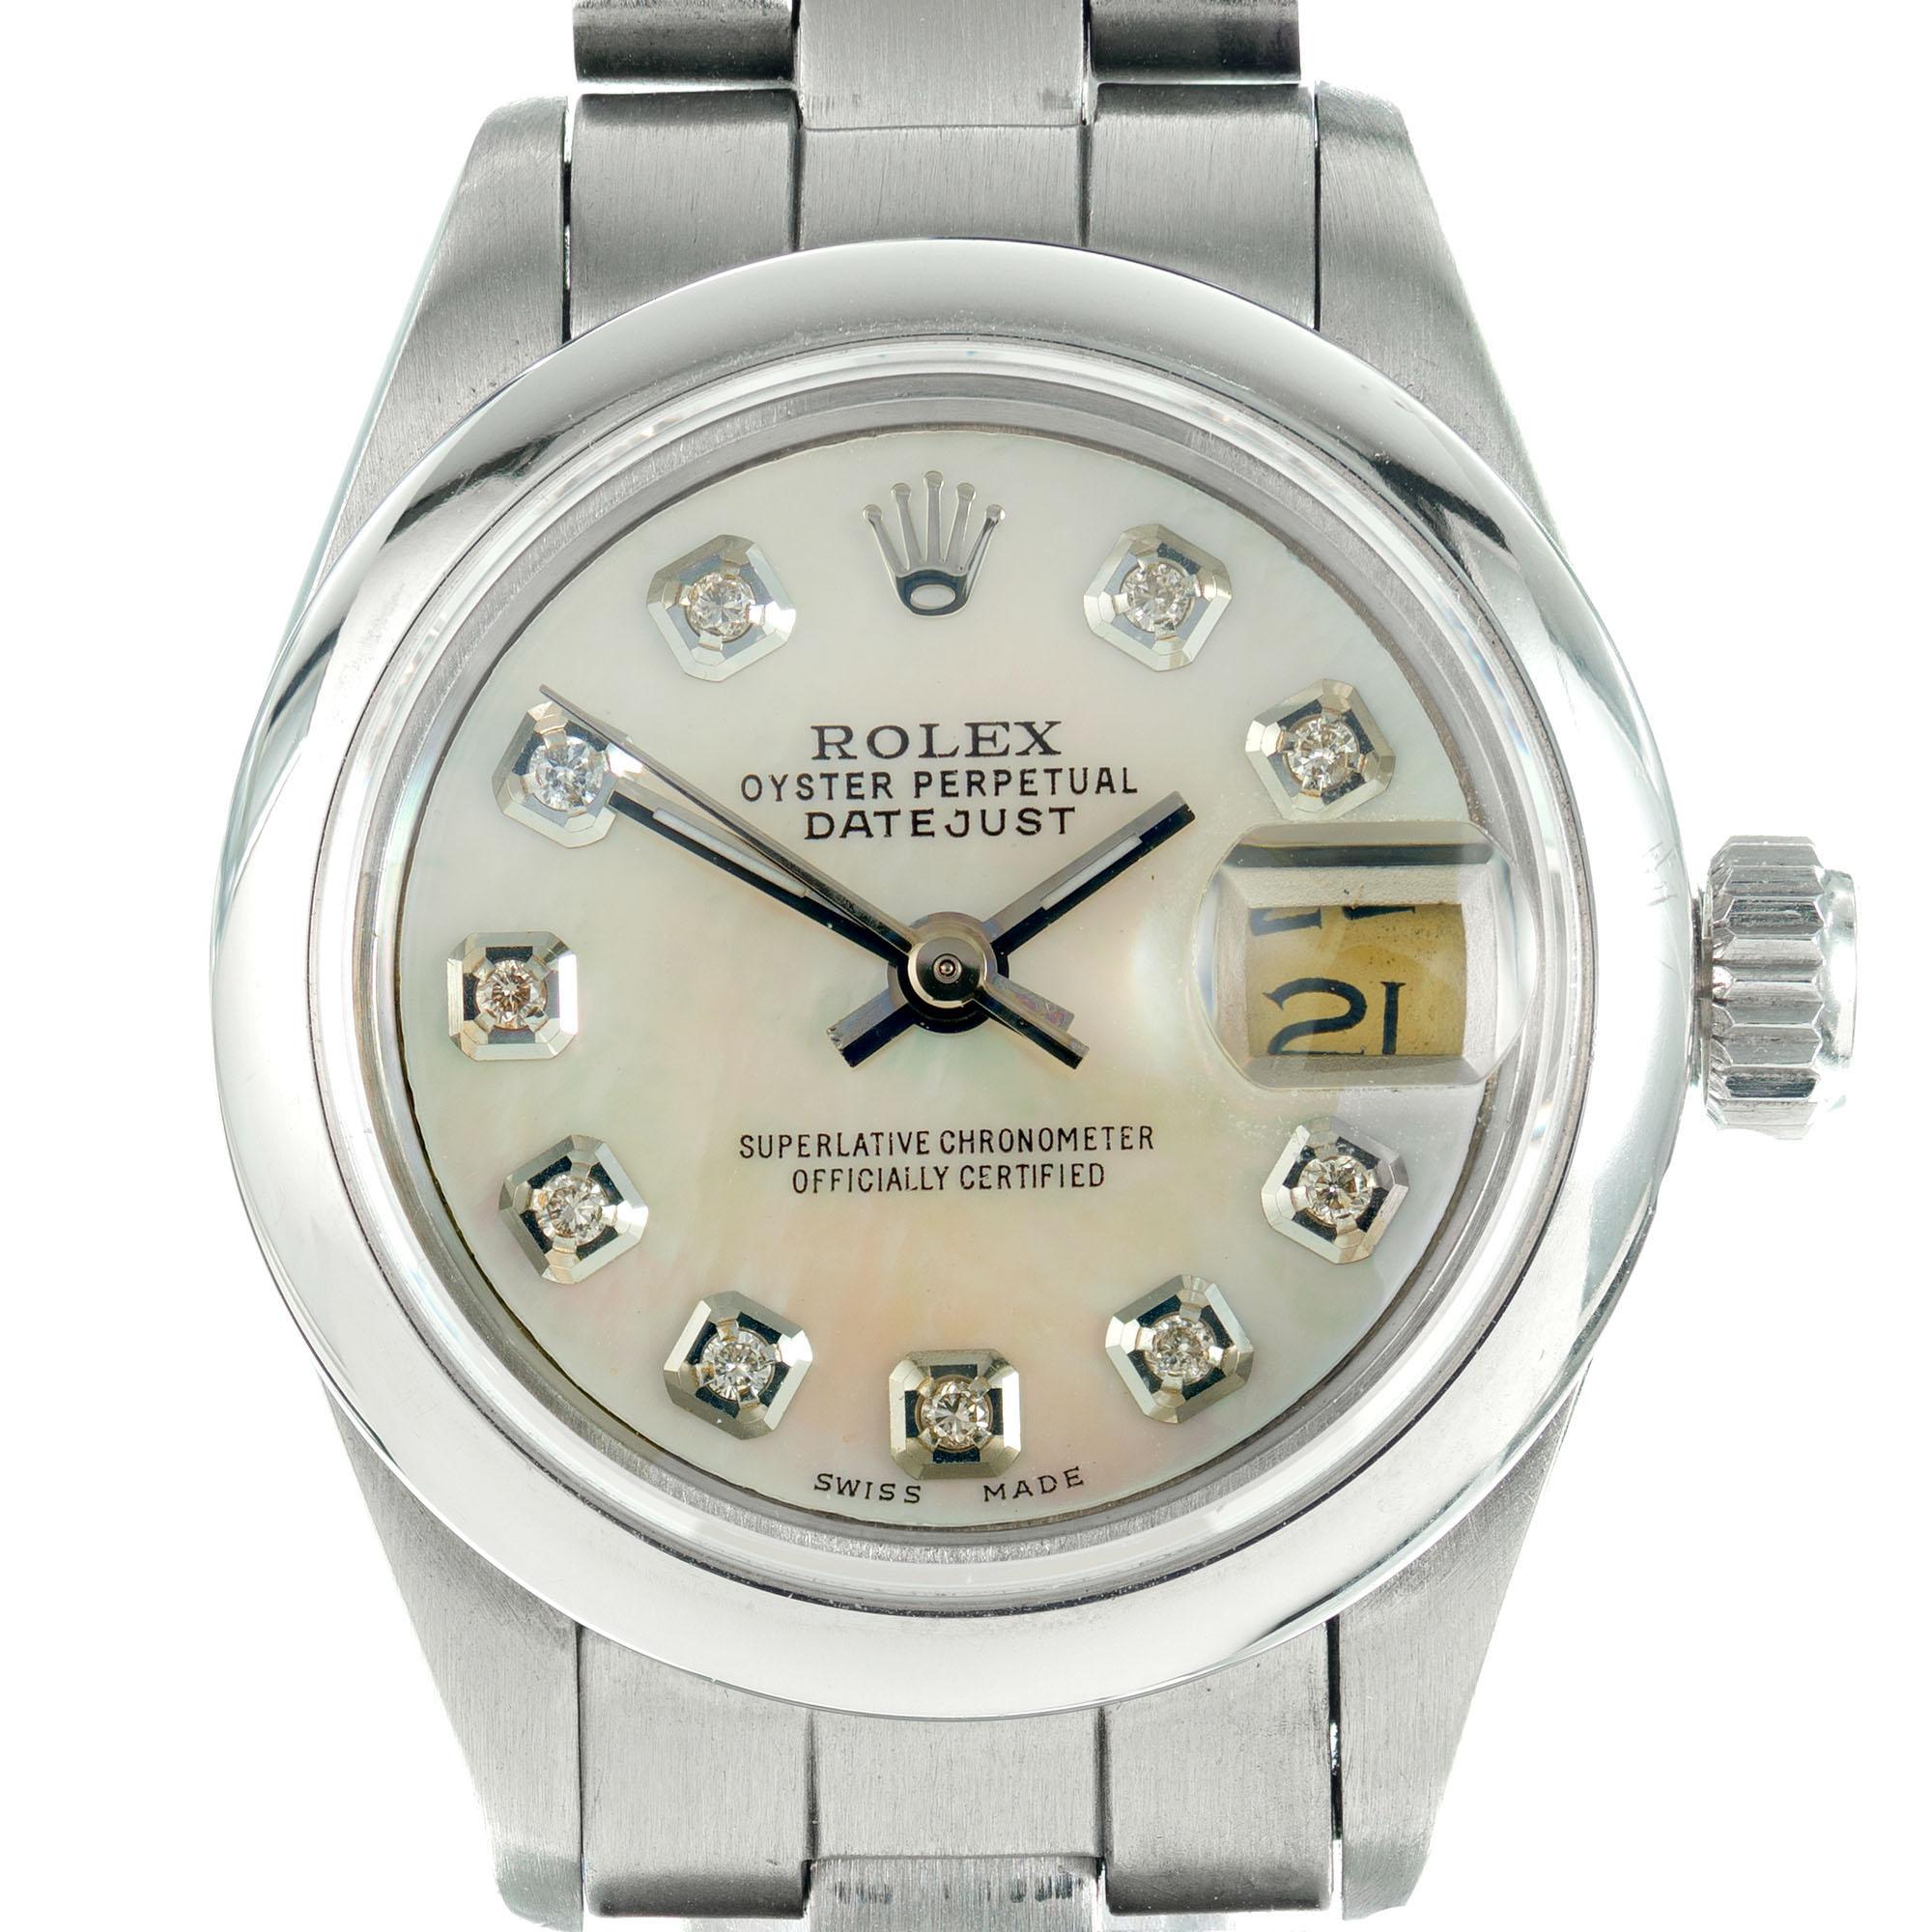 Rolex lady's stainless steel Datejust wristwatch with refinished with Mother-of-Pearl dial with diamond indexes, plain bezel, sapphire crystal and tight newer Oyster style bracelet.

Stainless steel
Top to bottom: 32.25mm 
Width without crown: 26mm